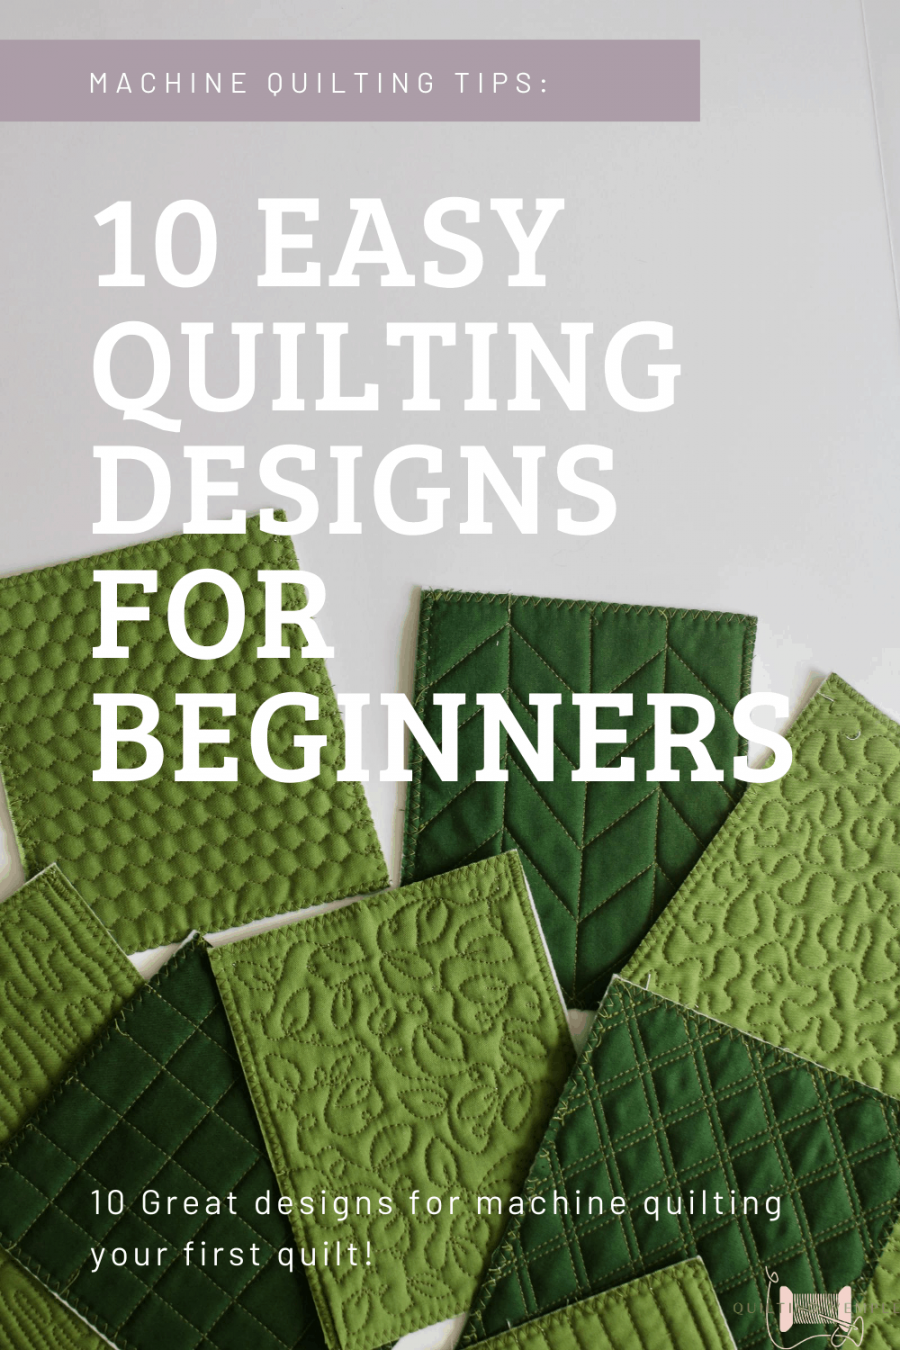 Easy Quilting Designs for Beginners - Quilting Wemple - FREE Printables - Printable Free Motion Quilting Patterns For Beginners